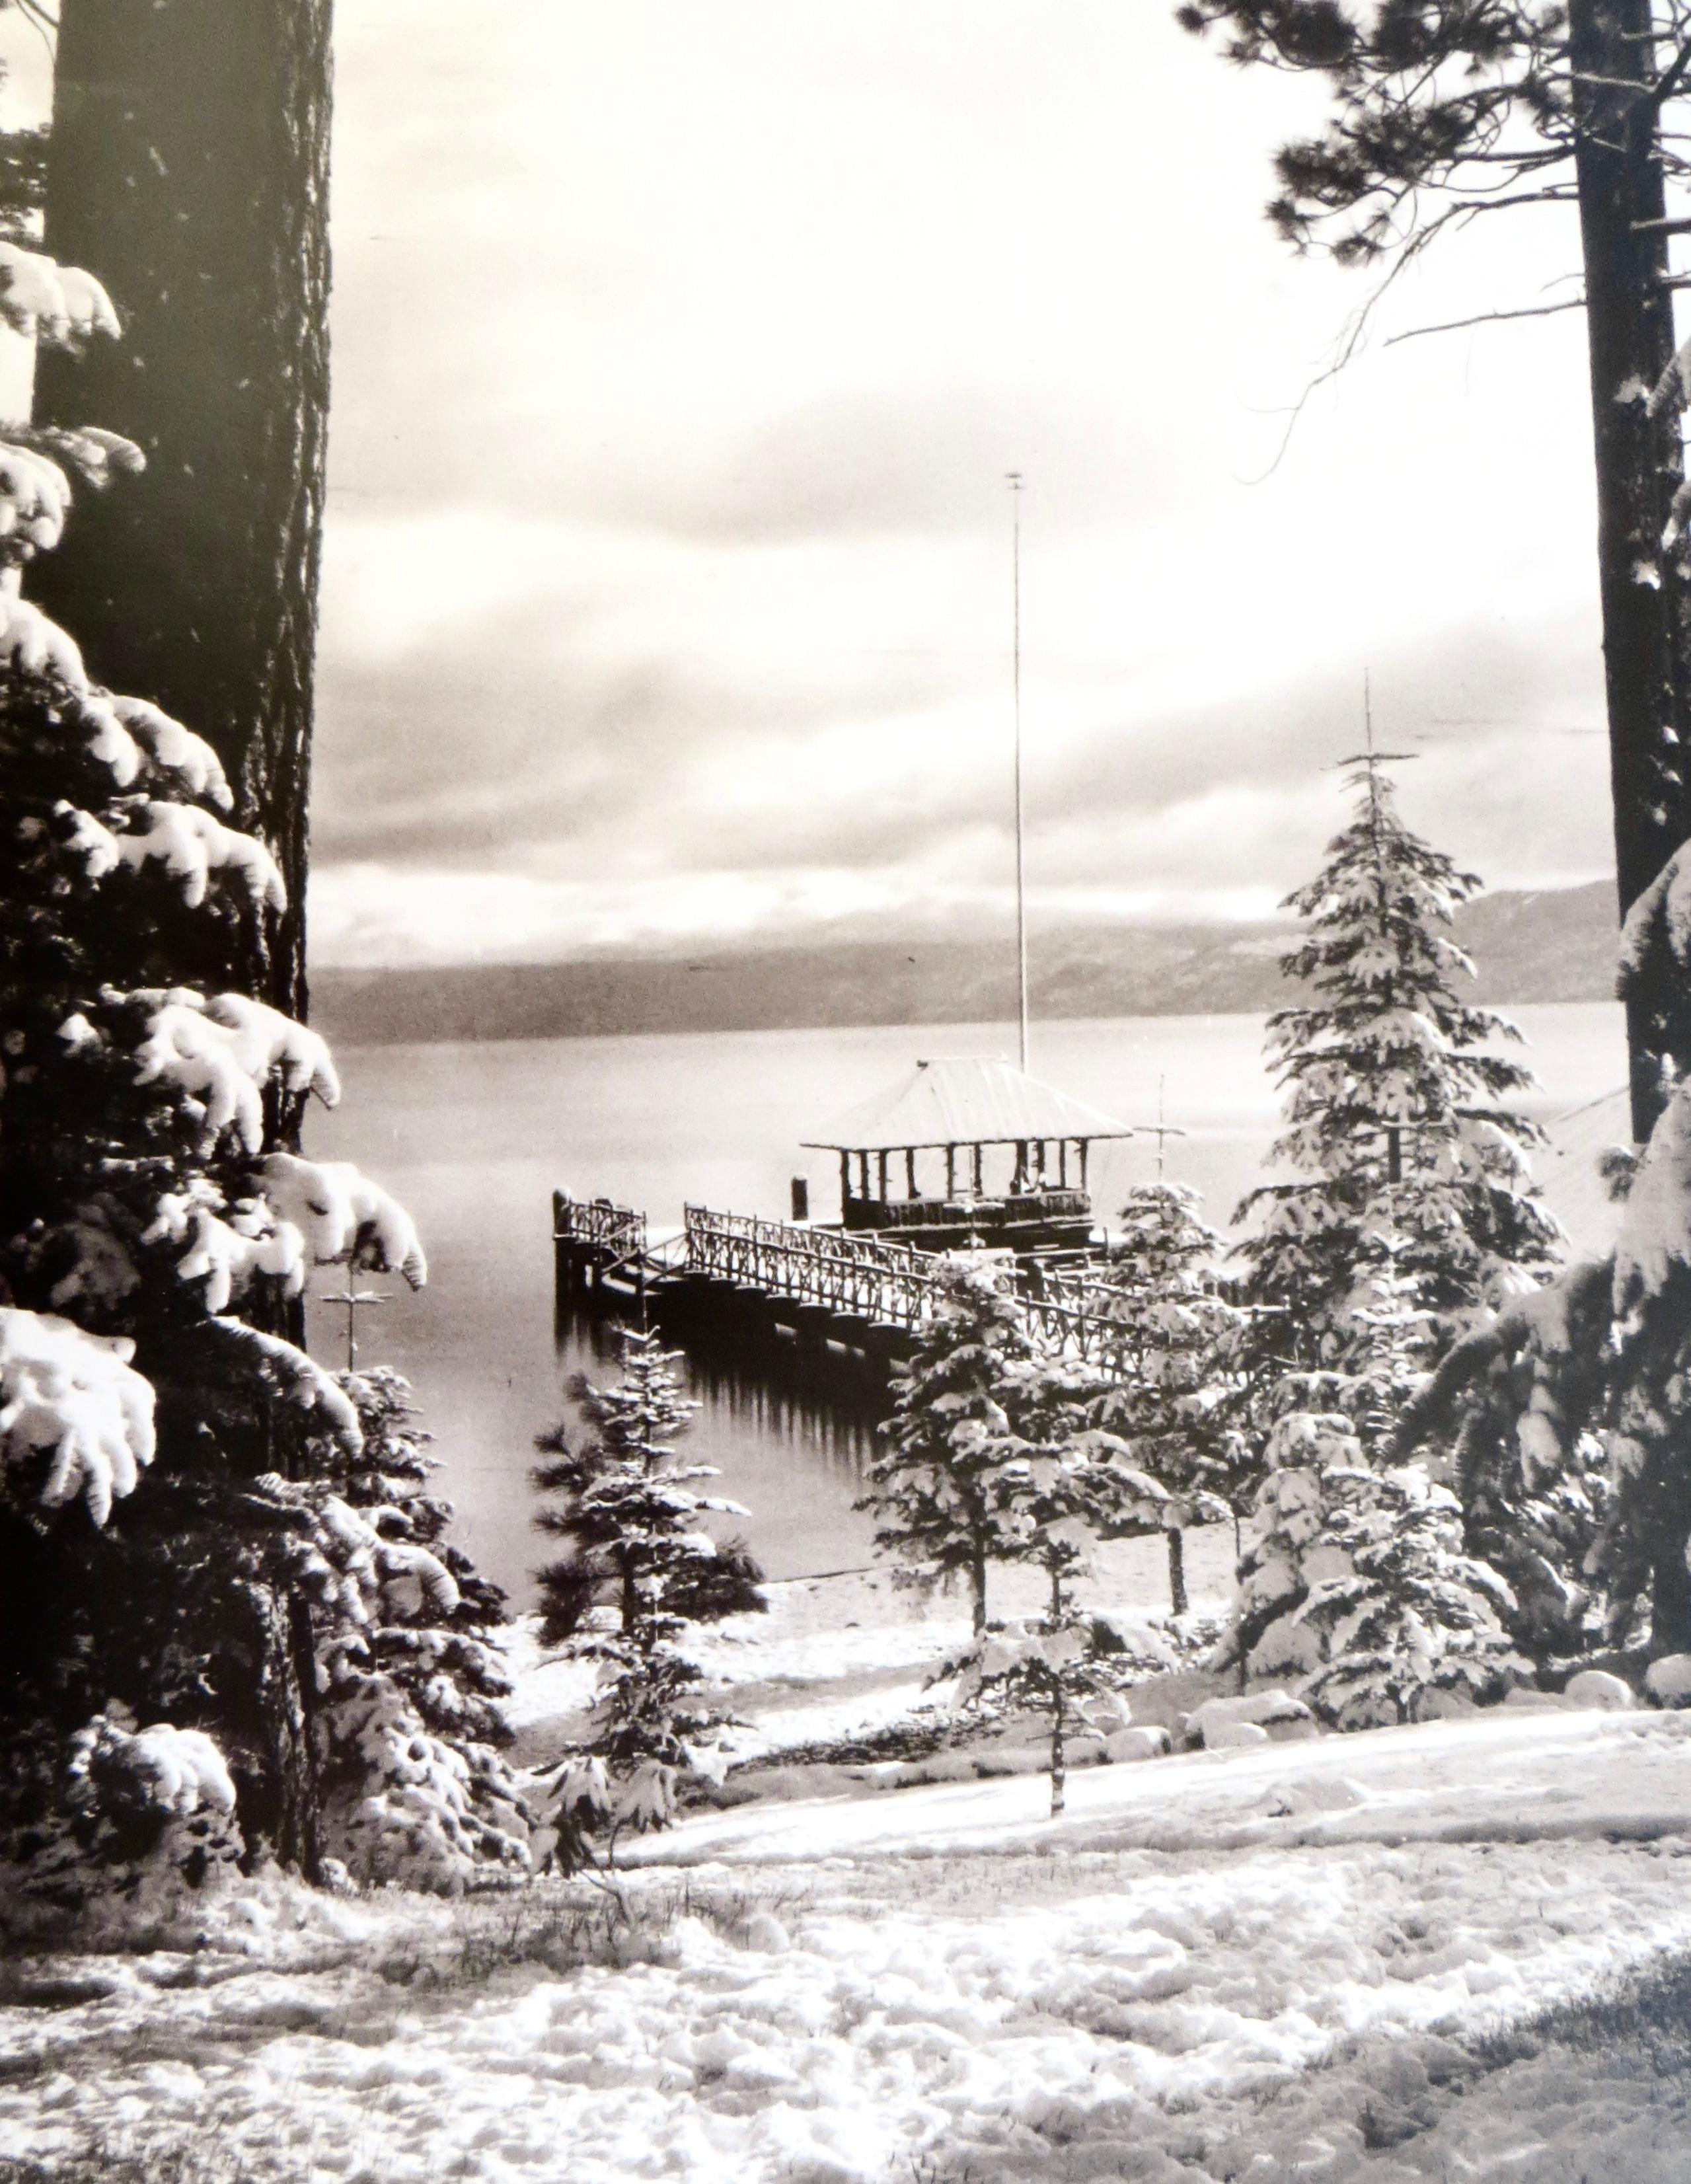 Vintage Lake Tahoe photograph, dated 1905, shows the lake as viewed through trees and winter snow. Typical of that era is a desirable slight sepia tone to the print, which is made from the original negative (see images). Mounted on hard board, this